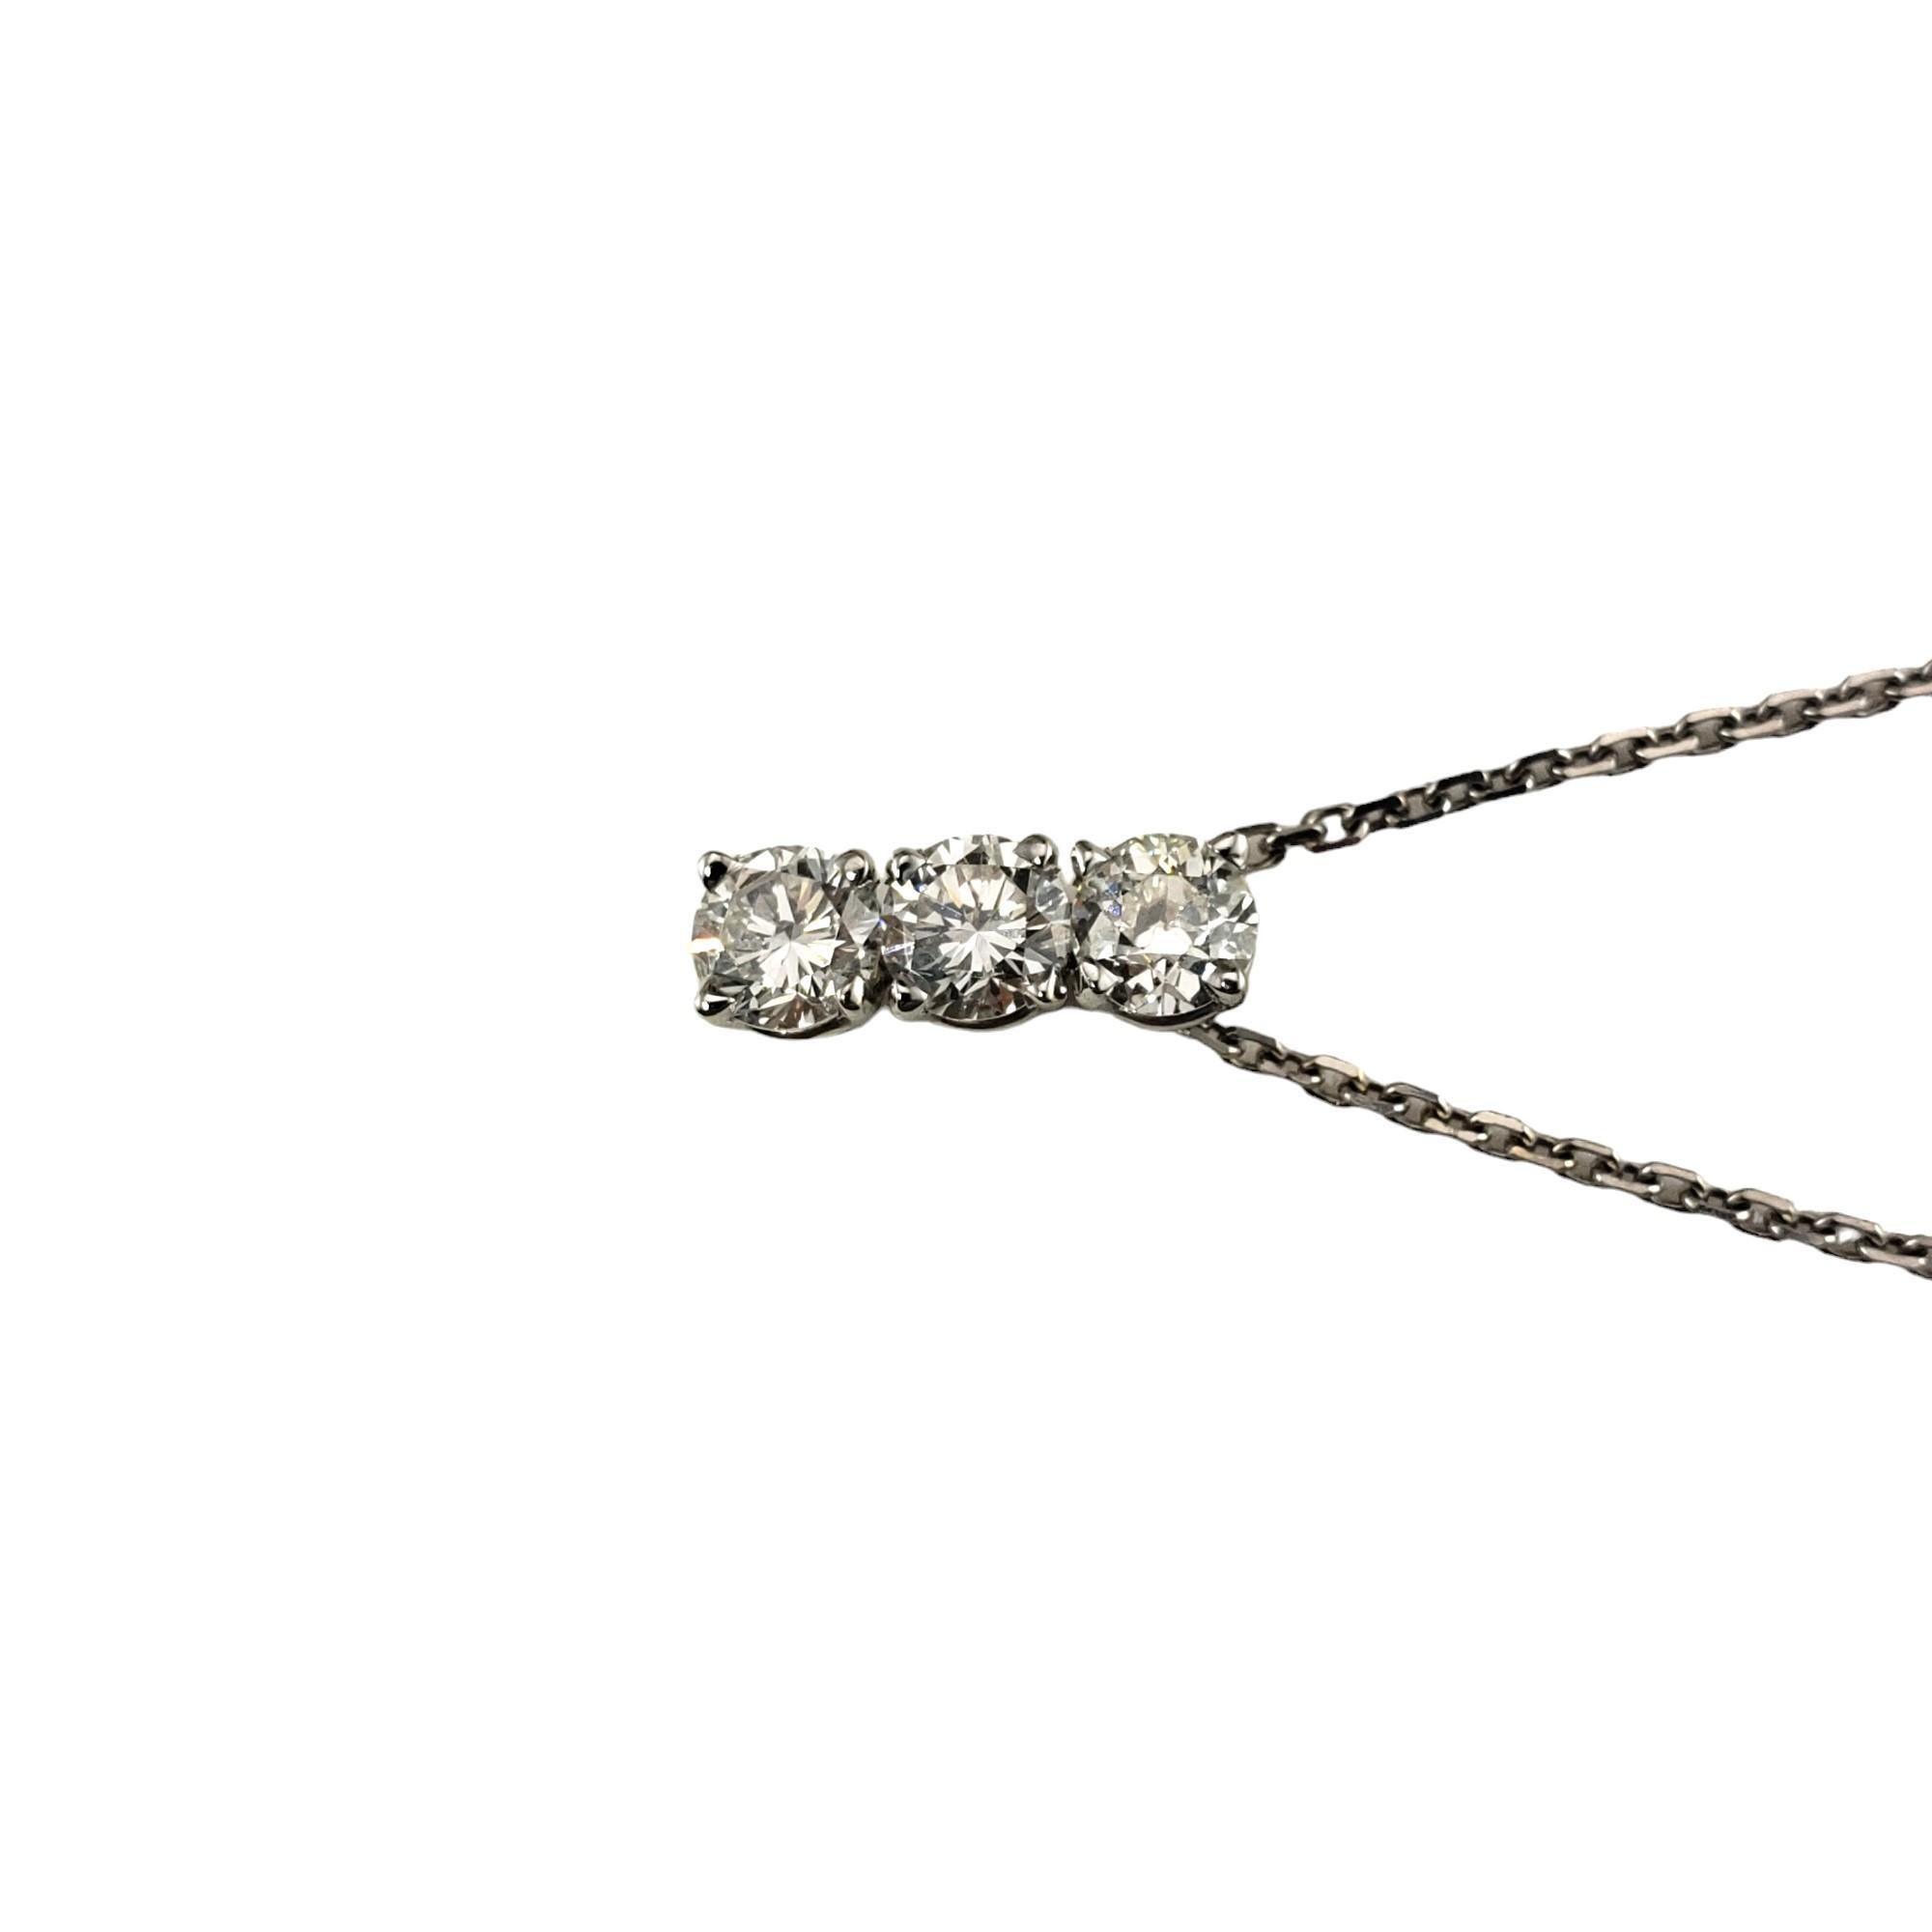 Vintage 14 Karat White Gold Diamond Pendant Necklace-

This sparkling pendant features two round brilliant cut diamonds and one European cut diamond suspended from a classic cable necklace.

Approximate total diamond weight: 1.32 ct.

Diamond color: